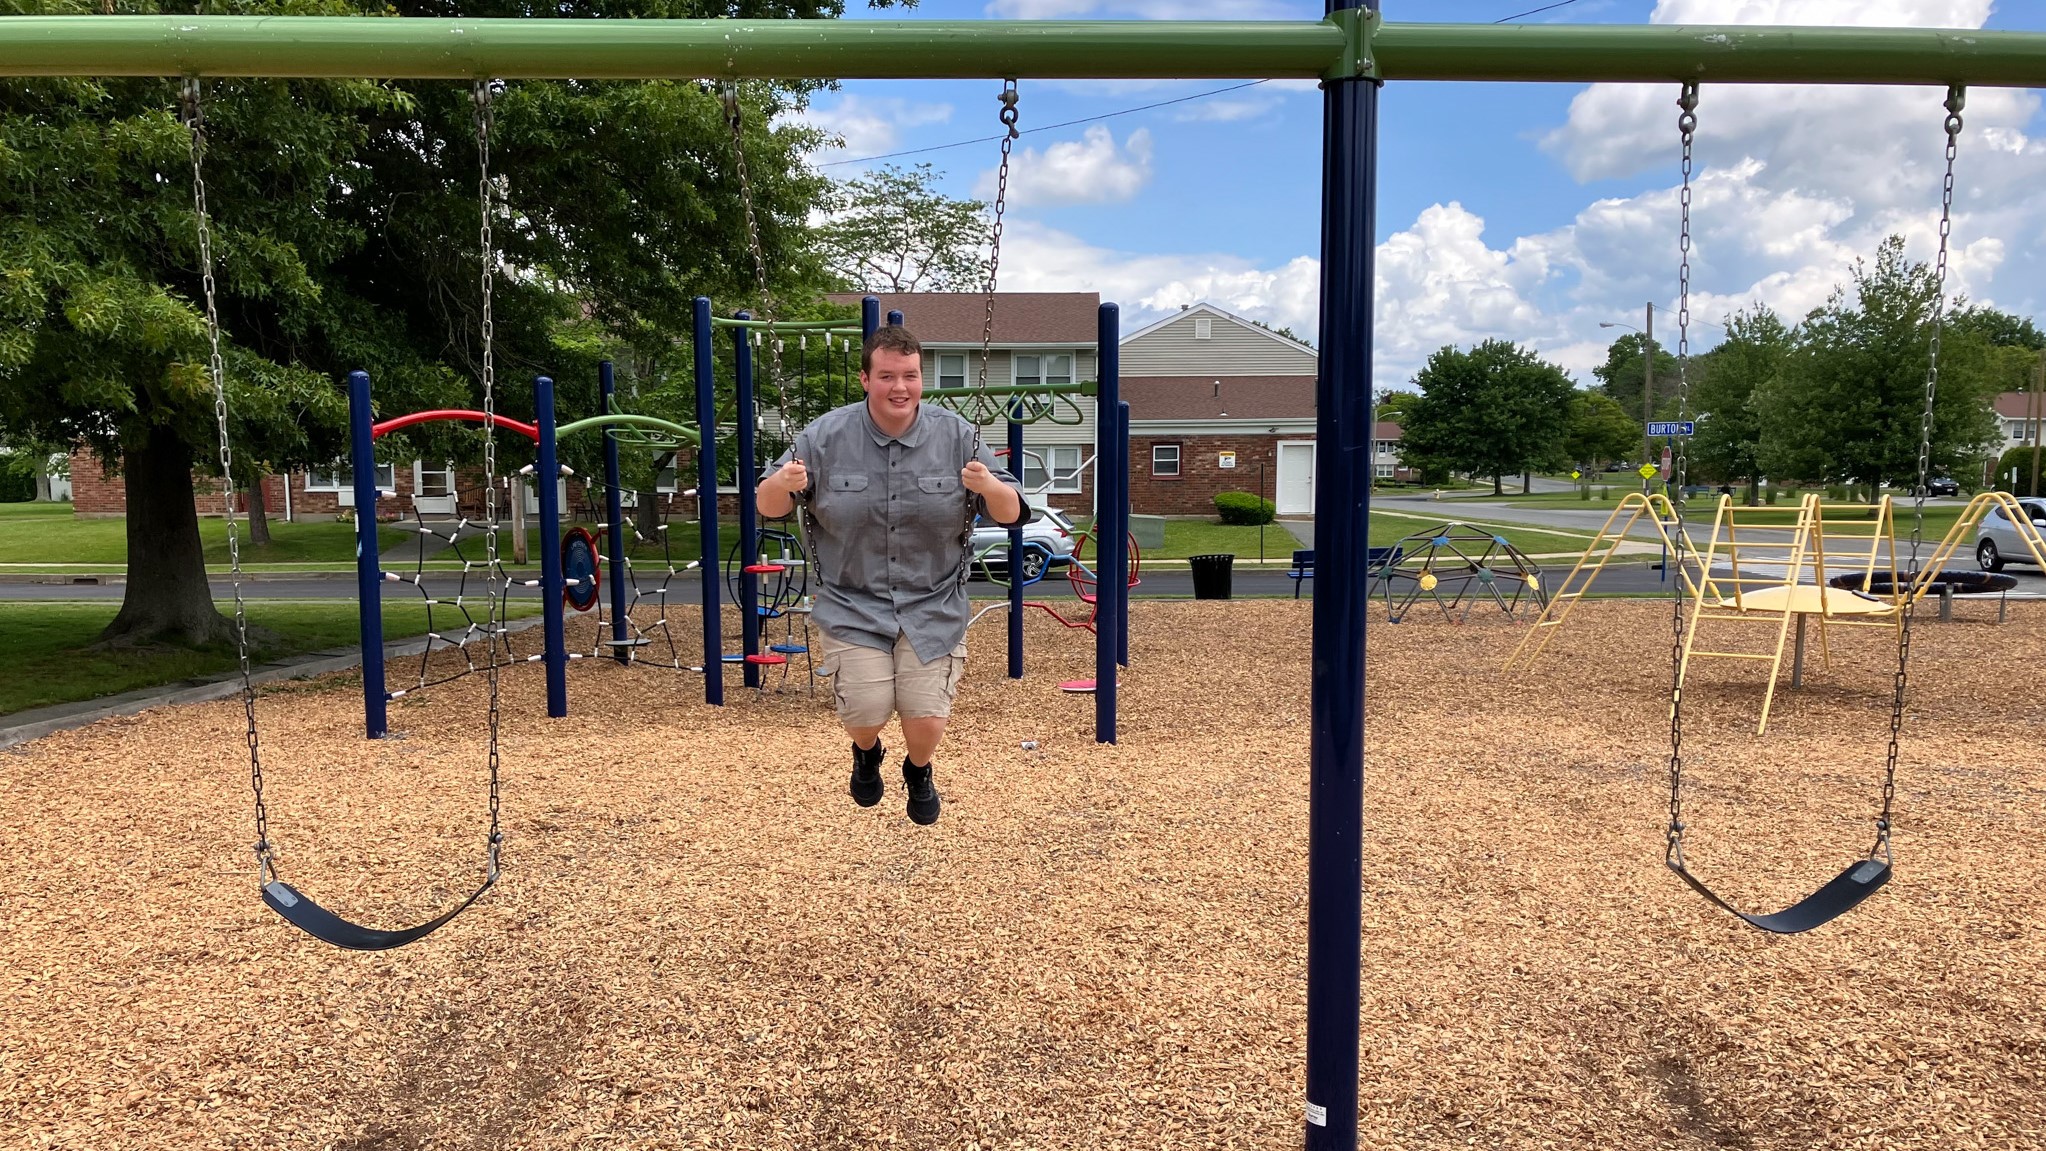 Chris Bove swings at the park in Oxbow Farms in Middletown on Saturday, June 10, 2023. Bove grew up at Oxbow Farms with his single mother and brother when nearly two-thirds of the units on the property were deed-restricted and designated affordable housing.